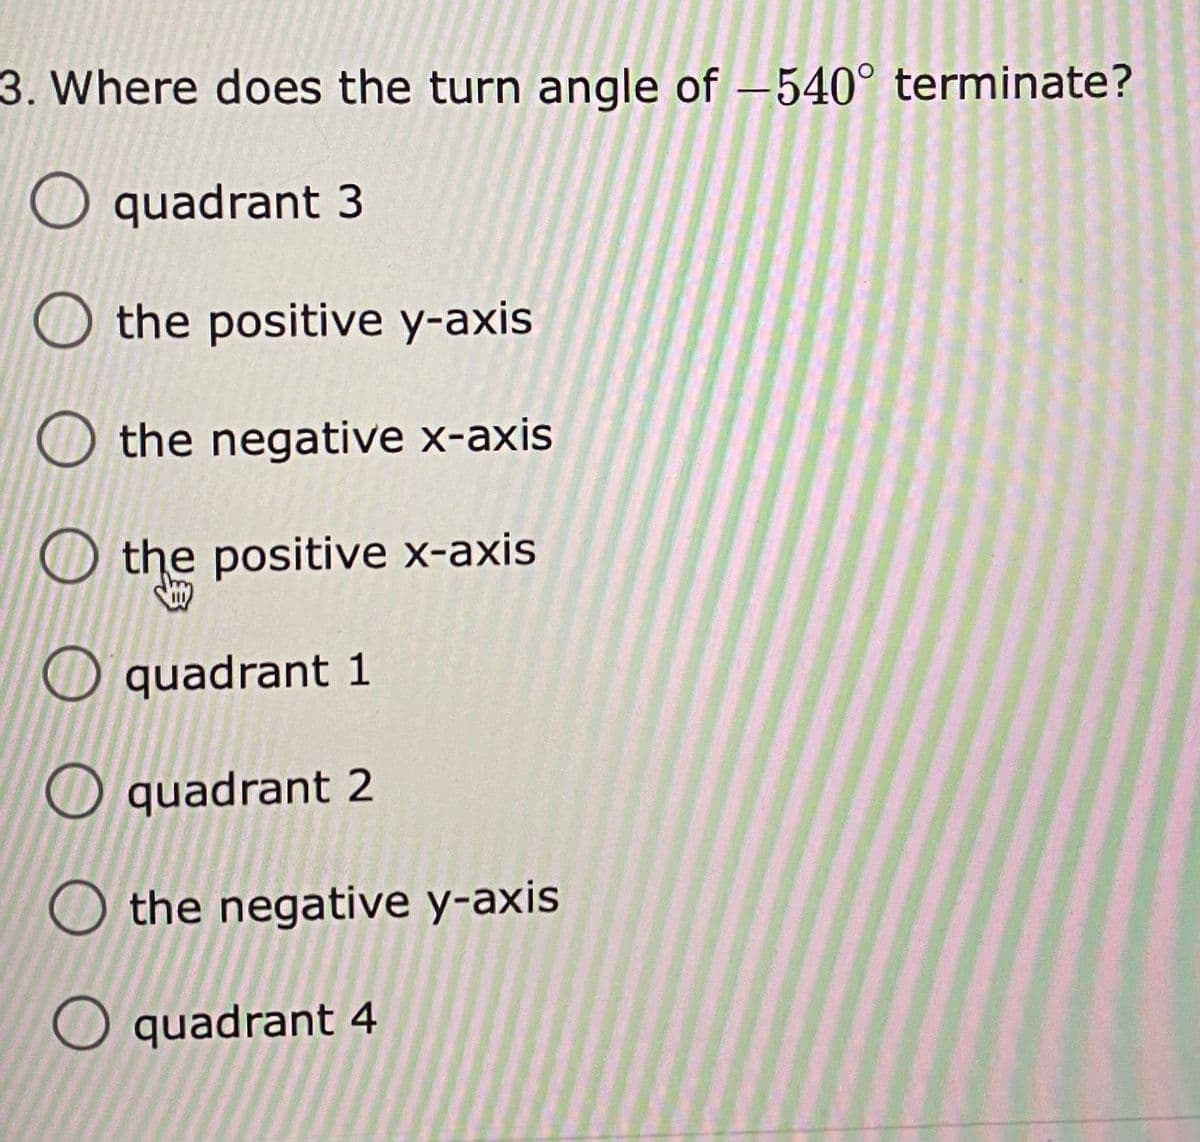 3. Where does the turn angle of – 540° terminate?
|
O quadrant 3
O the positive y-axis
O the negative x-axis
O the positive x-axis
O quadrant 1
O quadrant 2
O the negative y-axis
O quadrant 4
